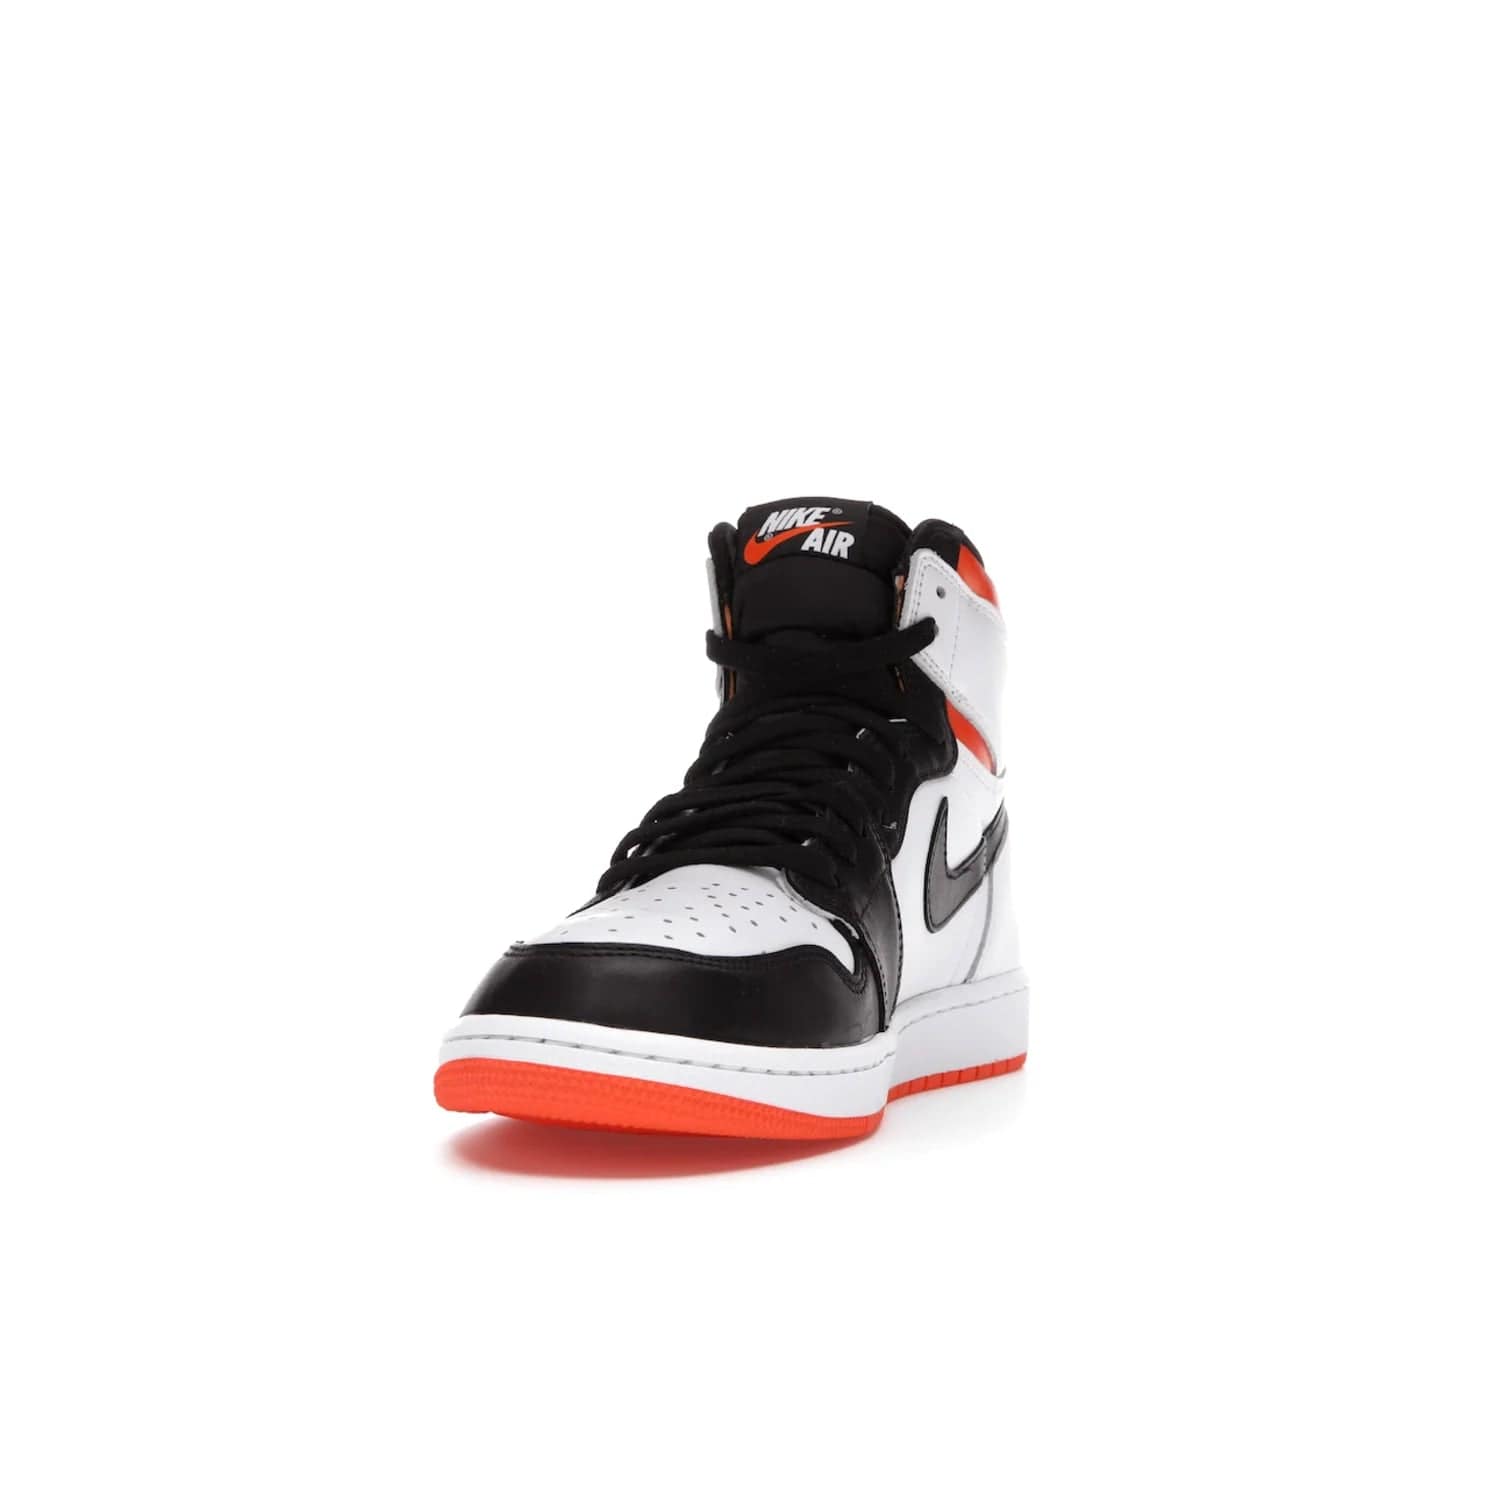 Jordan 1 Retro High Electro Orange - Image 12 - Only at www.BallersClubKickz.com - This Air Jordan 1 Retro High Electro Orange features a white leather upper with black overlays and vibrant Hyper Orange ankle wrap. Turn heads with this iconic design of woven tongue label and sole. Get yours today and add some serious style to your rotation.